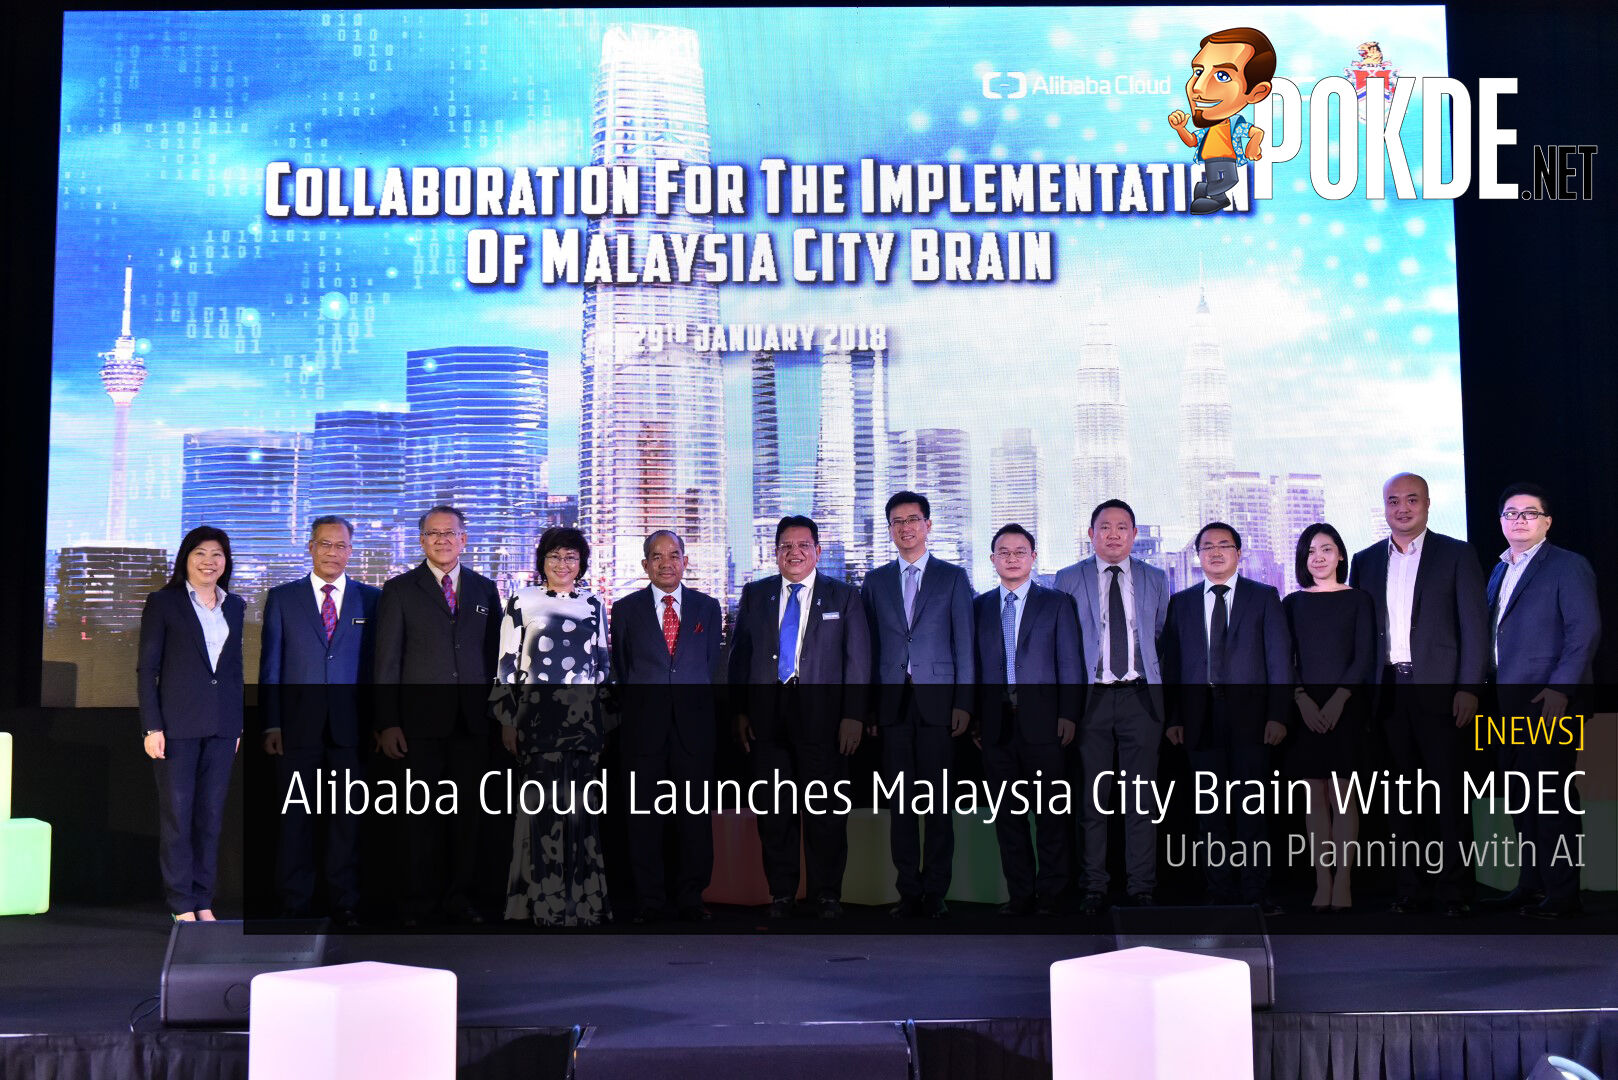 Alibaba Cloud Launches Malaysia City Brain With MDEC - Urban Planning with AI 21